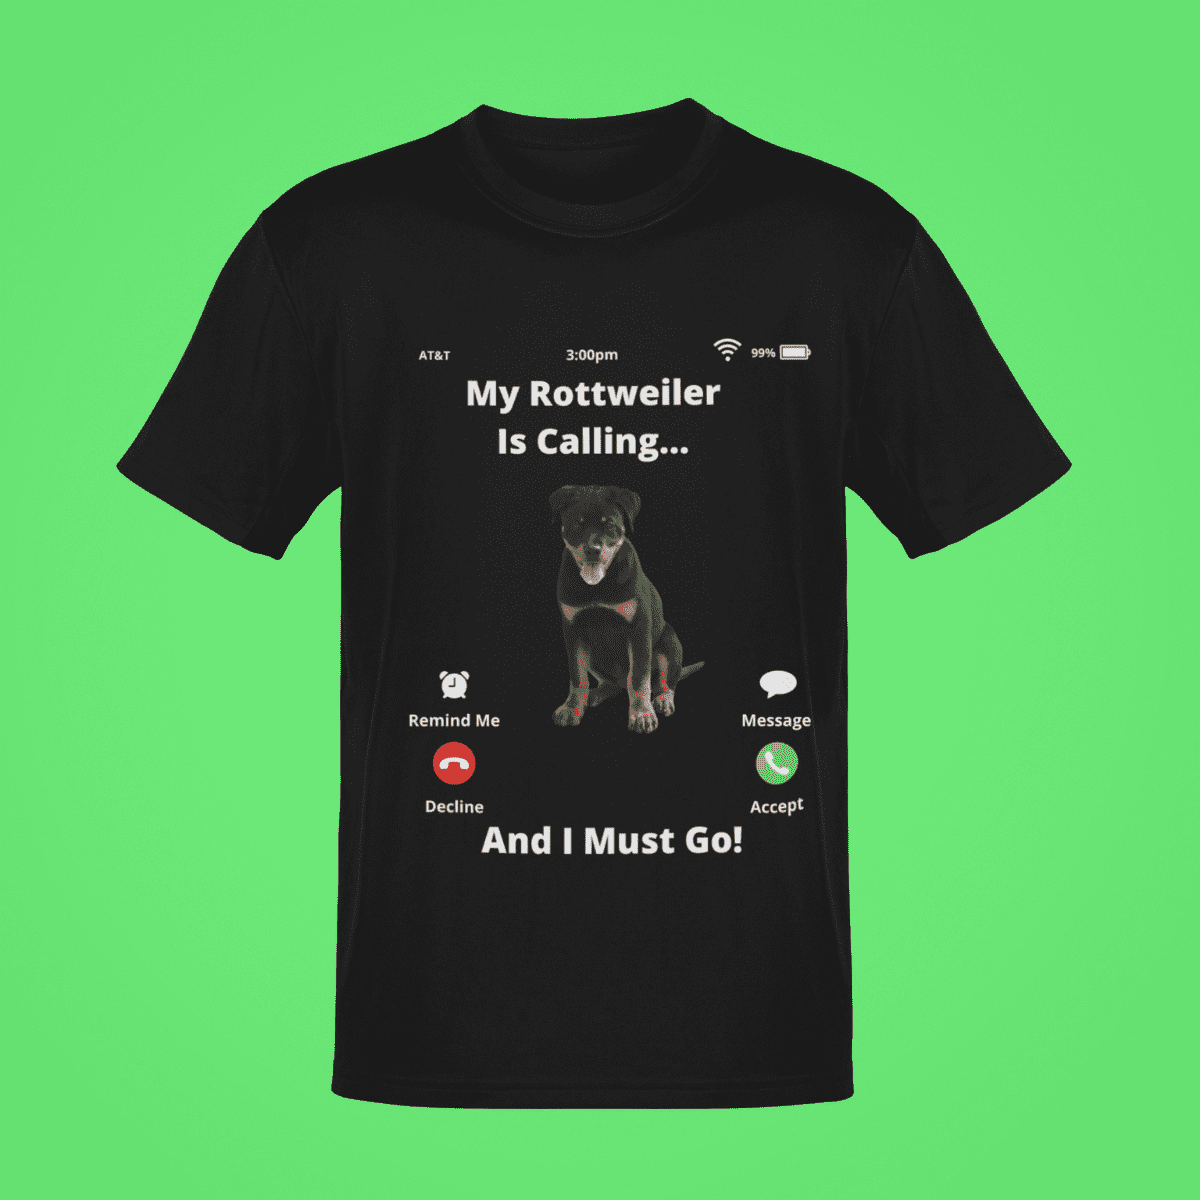 My Rottweiler is calling and I must go - Love to pet dogs, Gift for Rottweiler owner